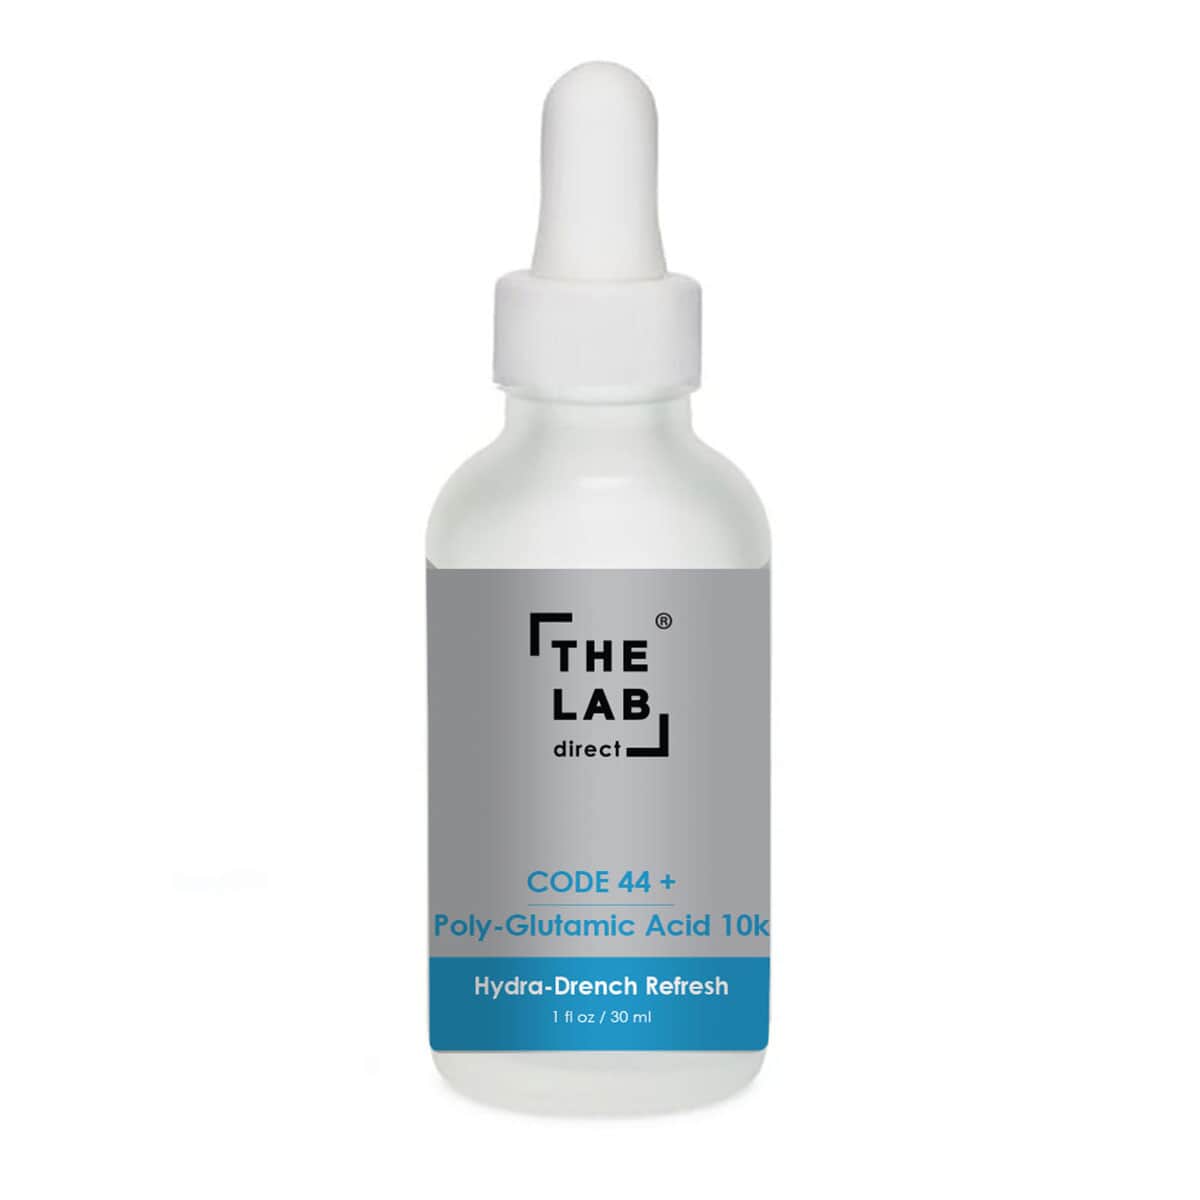 The Lab Direct Code 44+ Poly-Glutamic Acid 10k Hydra-Drench Refresh Serum For All Skin Types, Cruelty And Paraben Free Face Serum To Reduce Fine Lines And Wrinkles 1 oz image number 0